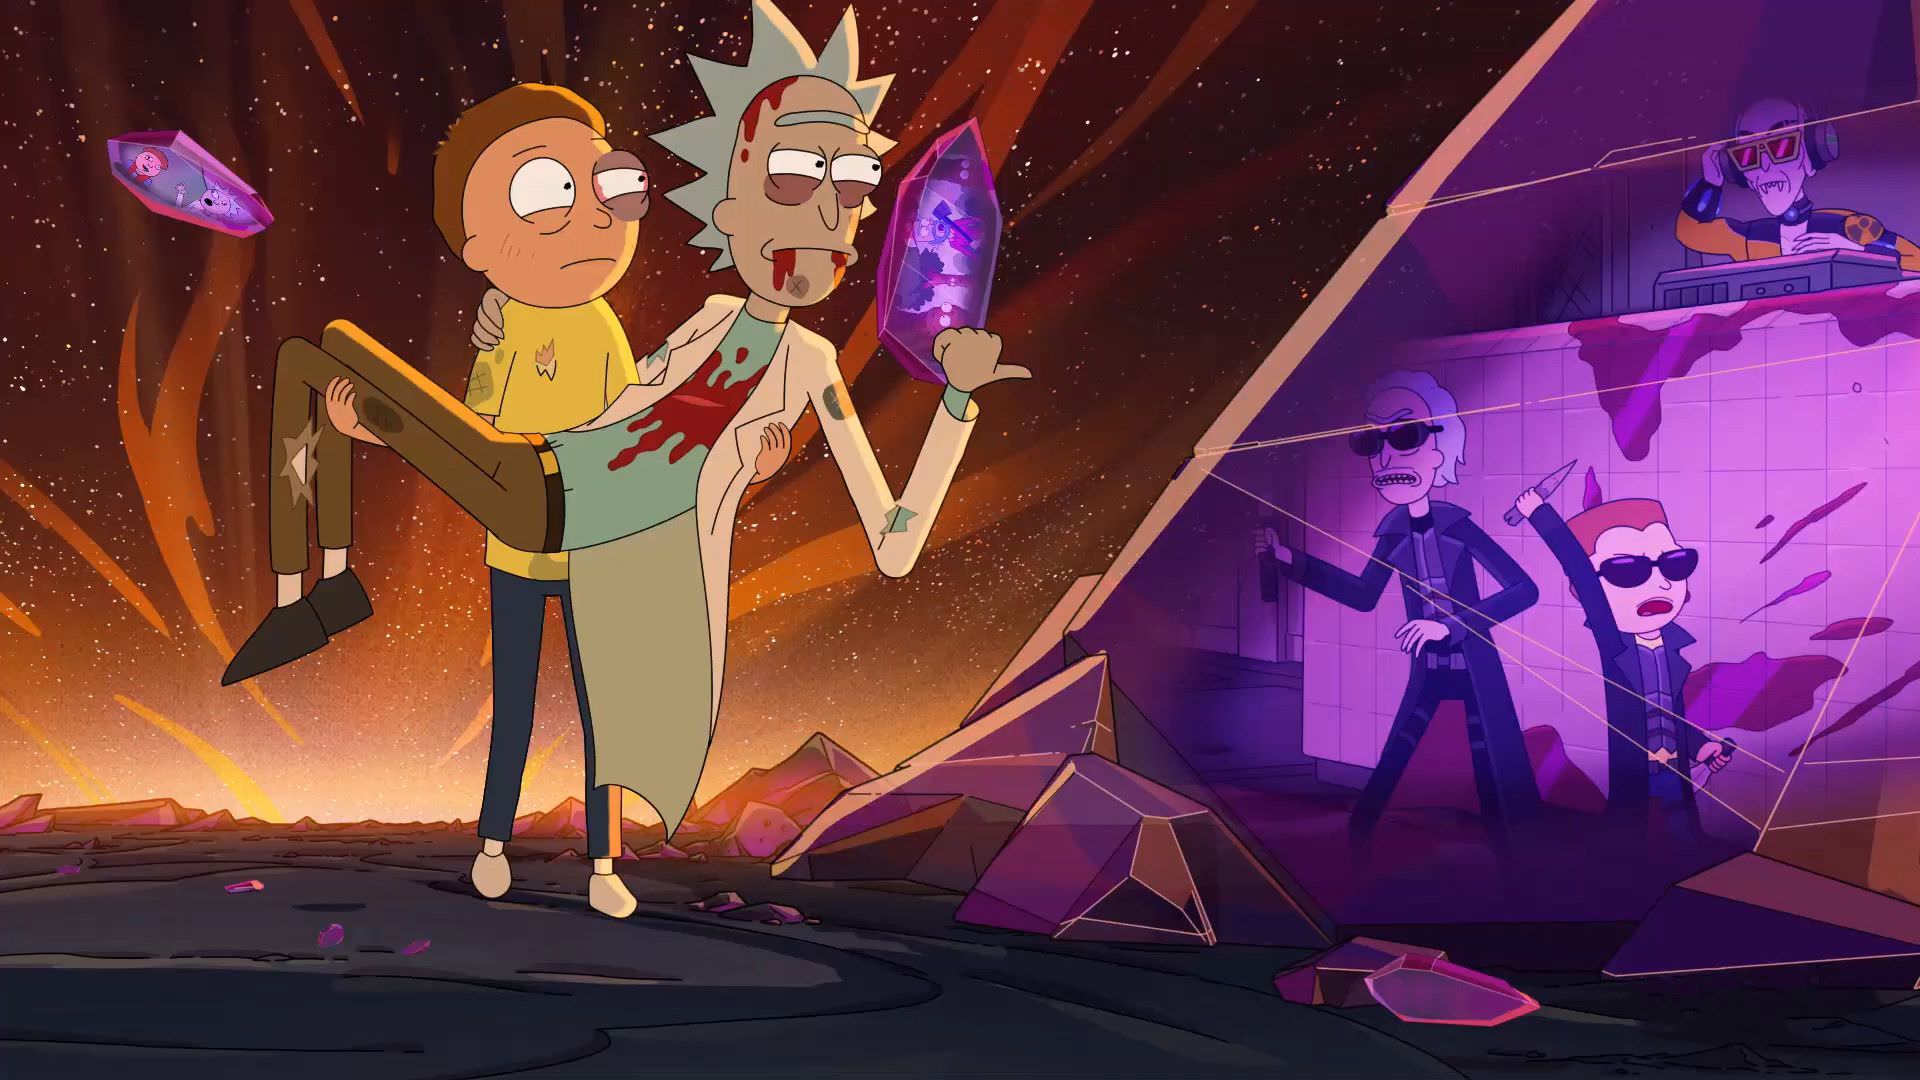 rick and morty season 5 episode 1 watch